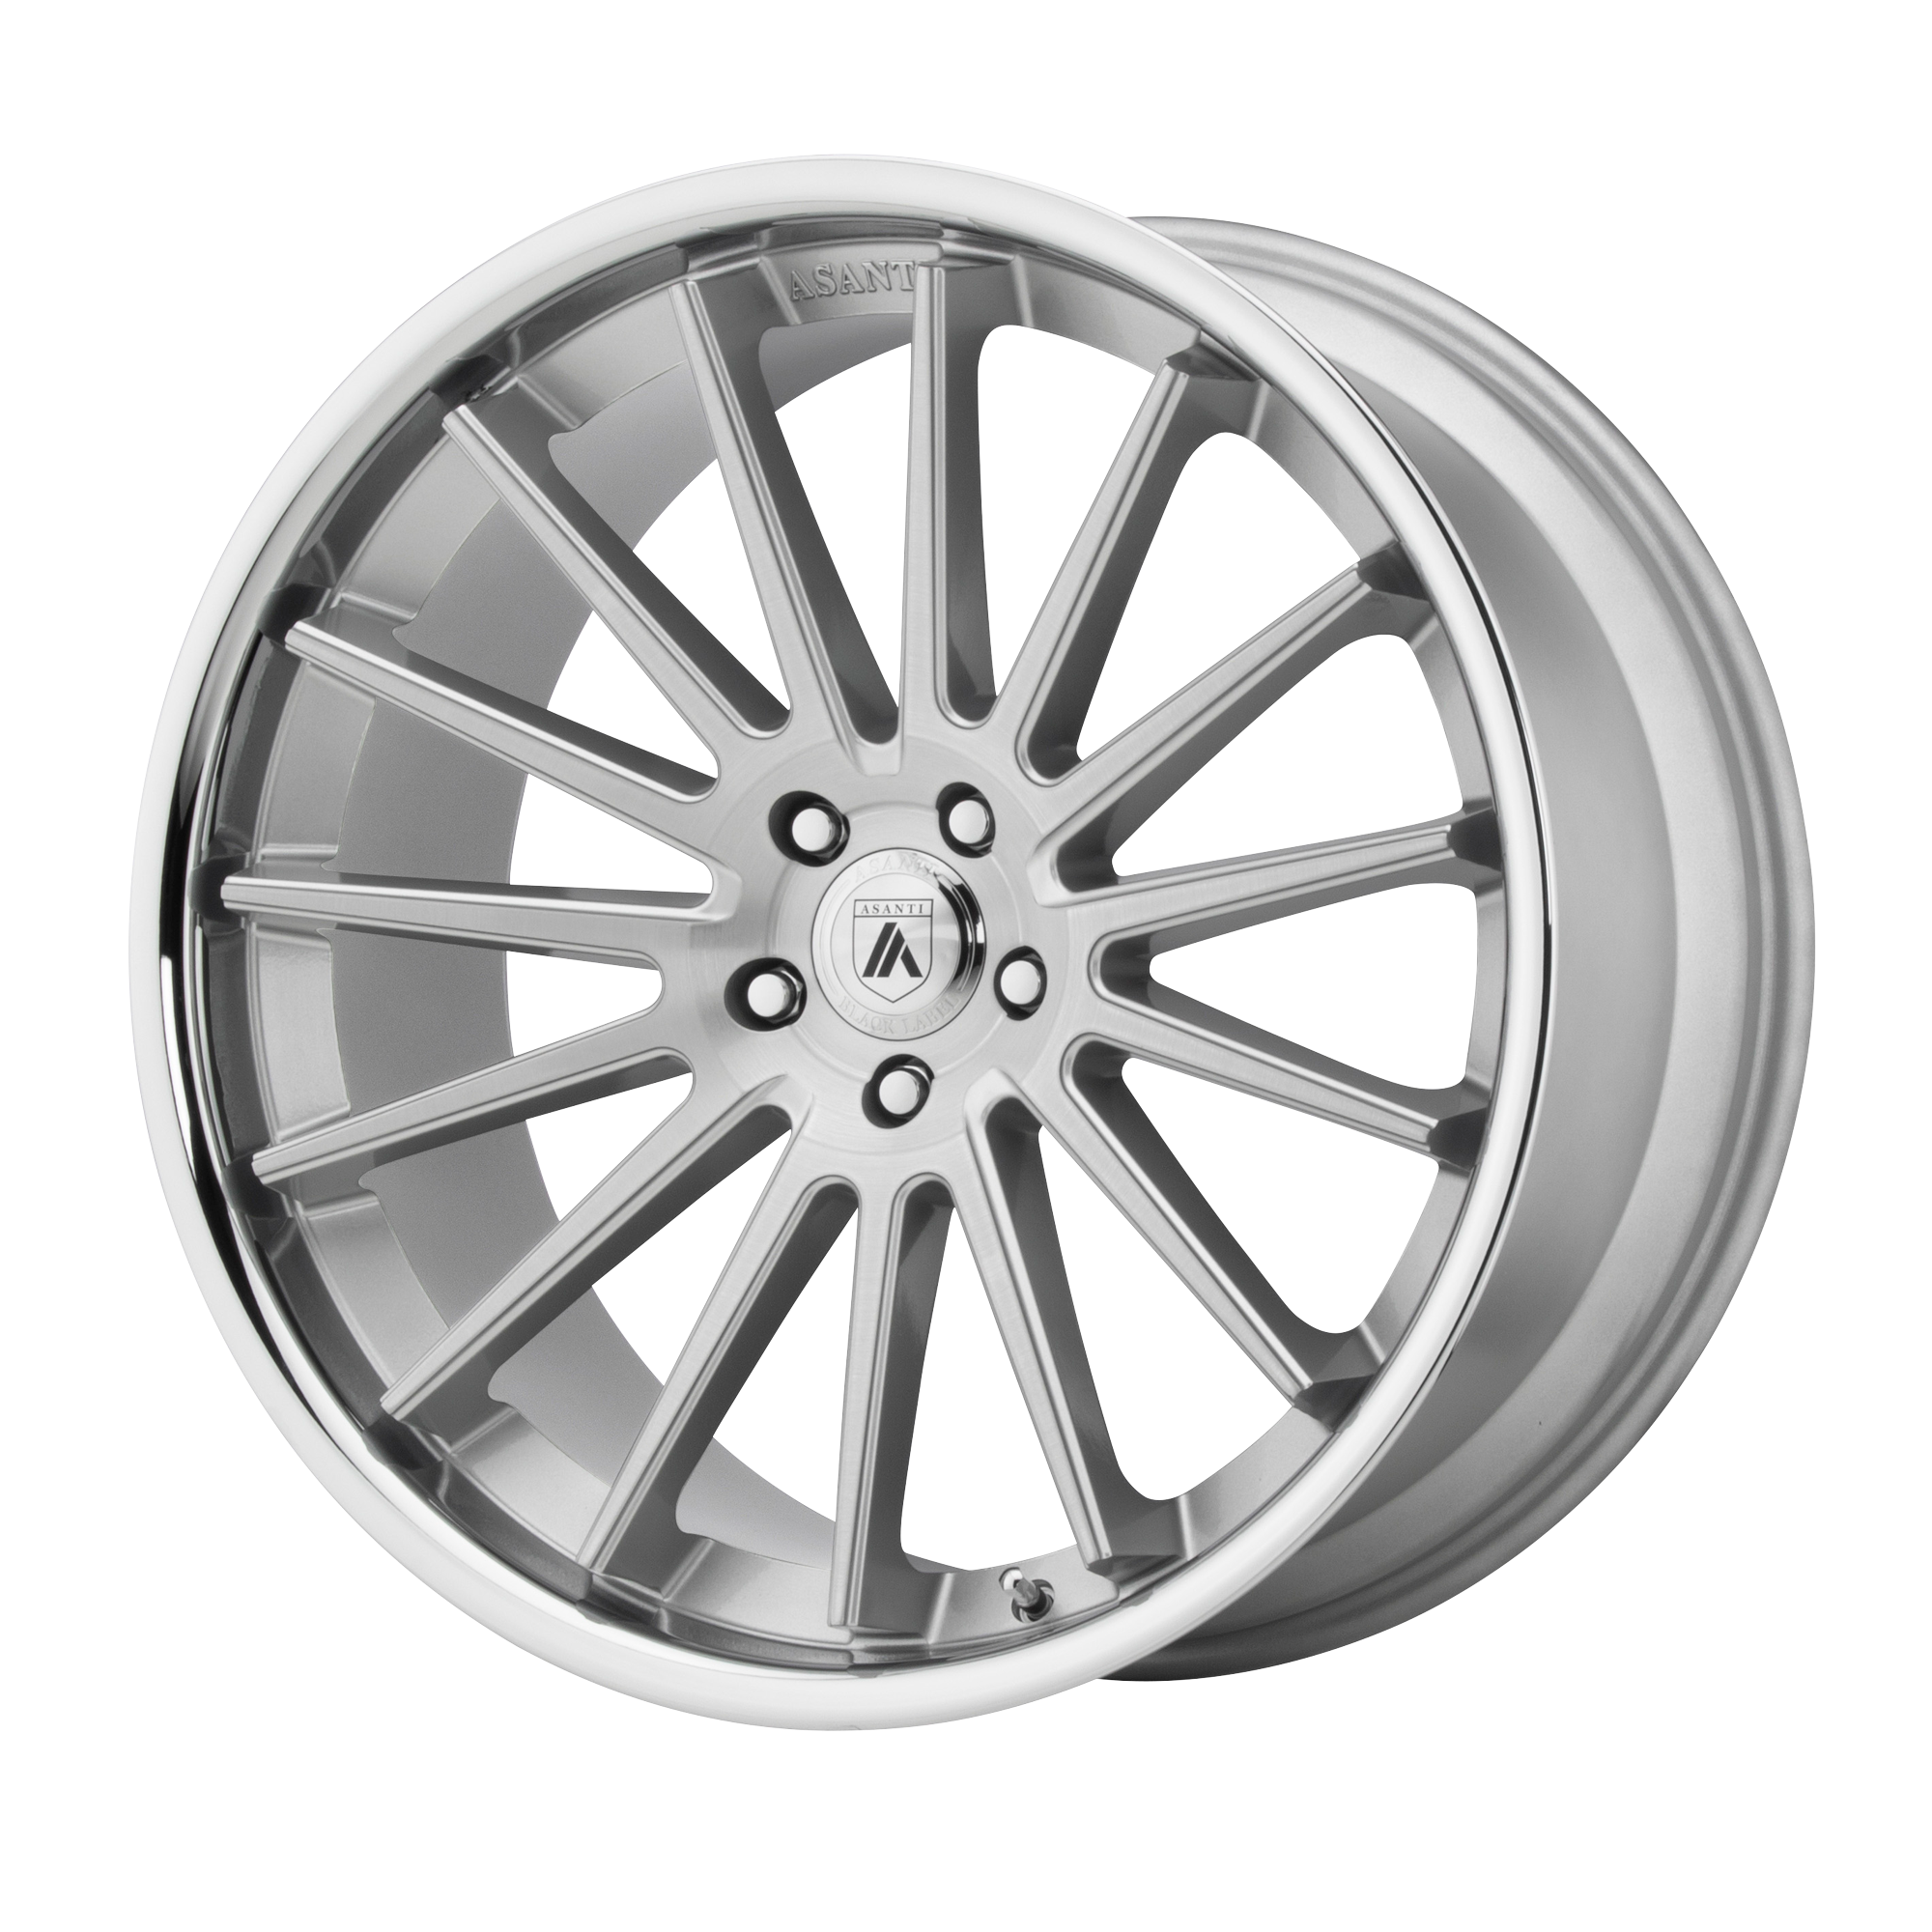 BETA 20x10.5 Blank BRUSHED SILVER W/ CHROME LIP (20 mm) - Tires and Engine Performance